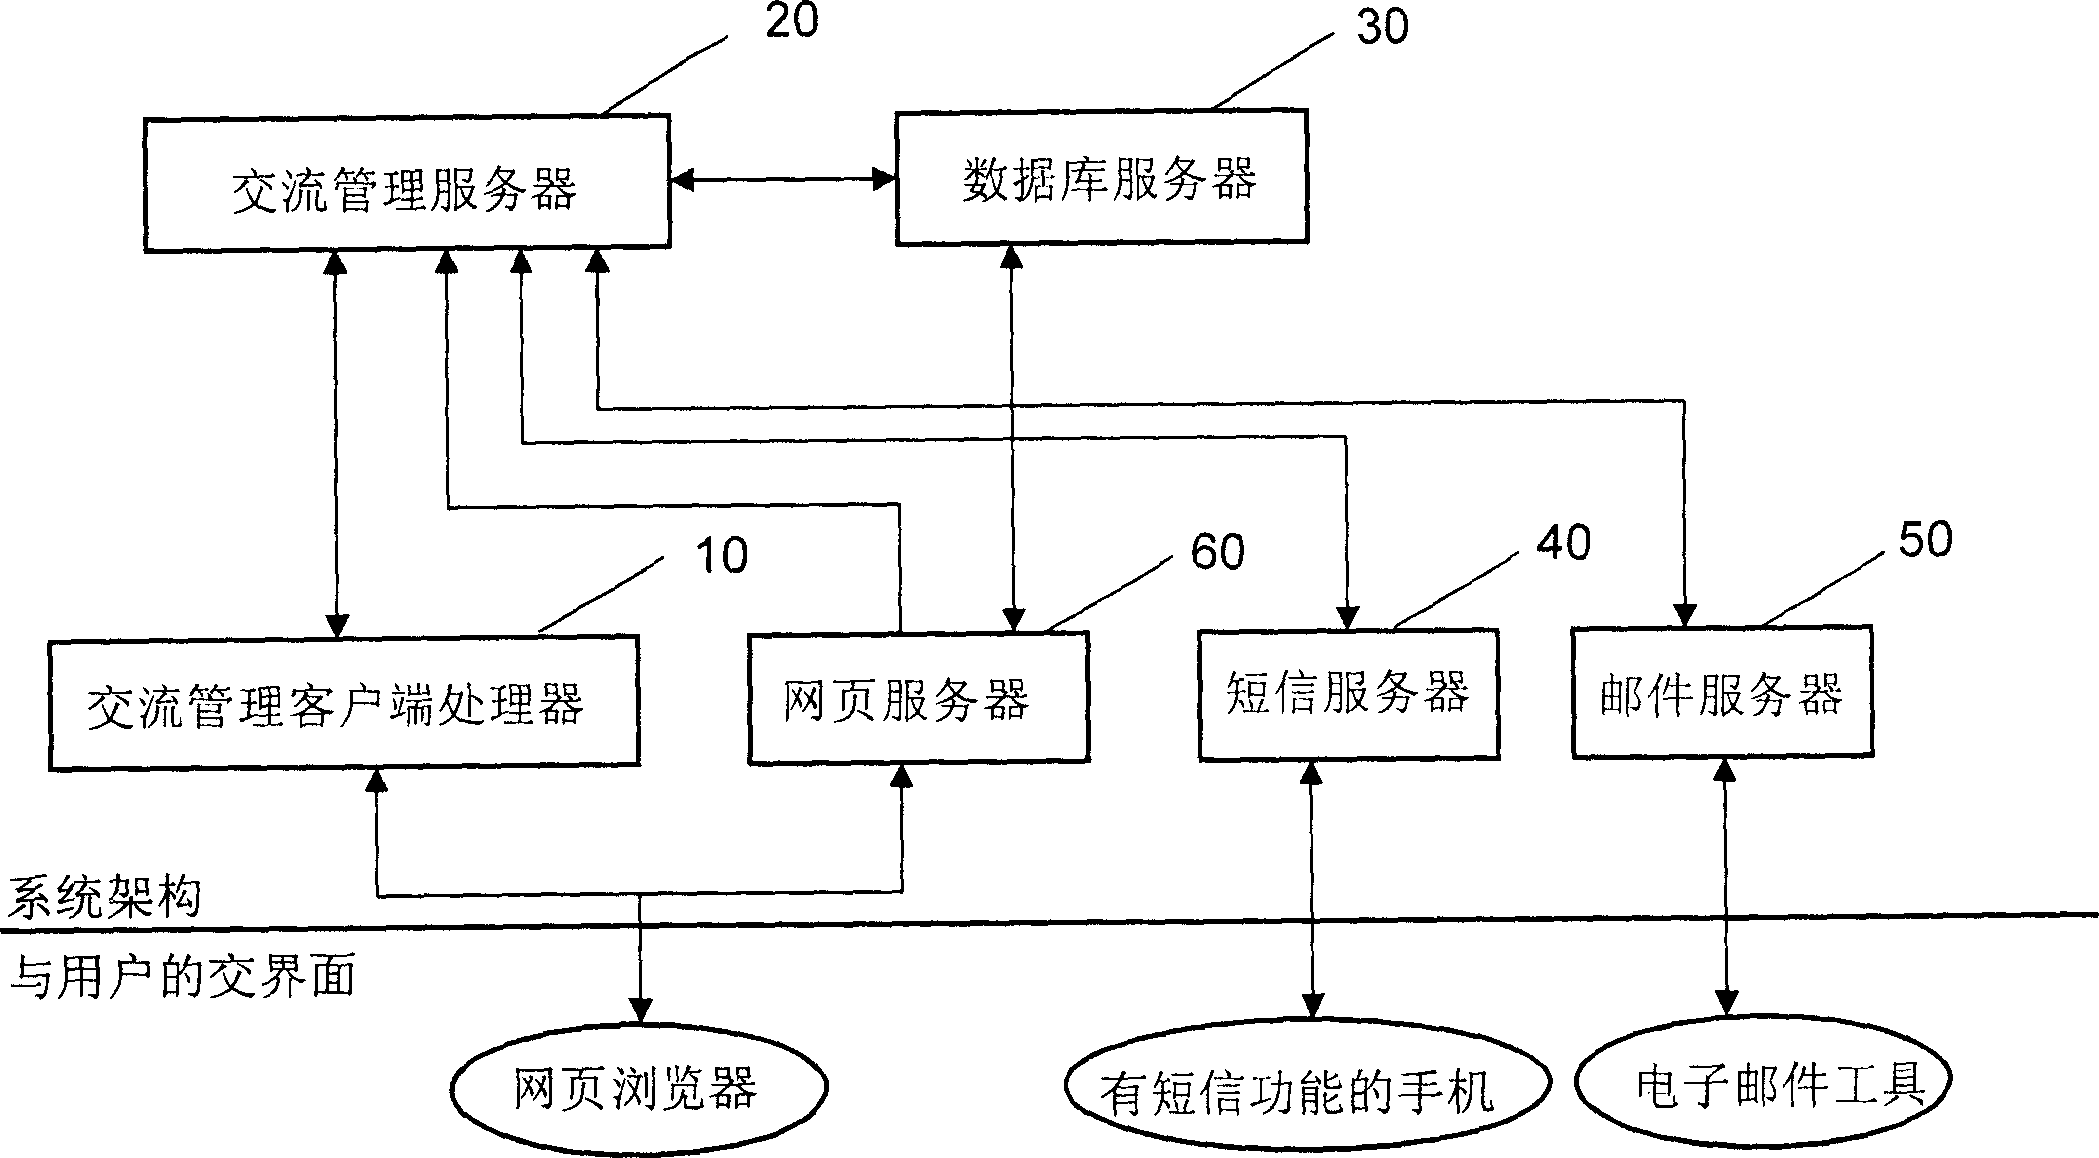 System and method for network communication and processing communication recording